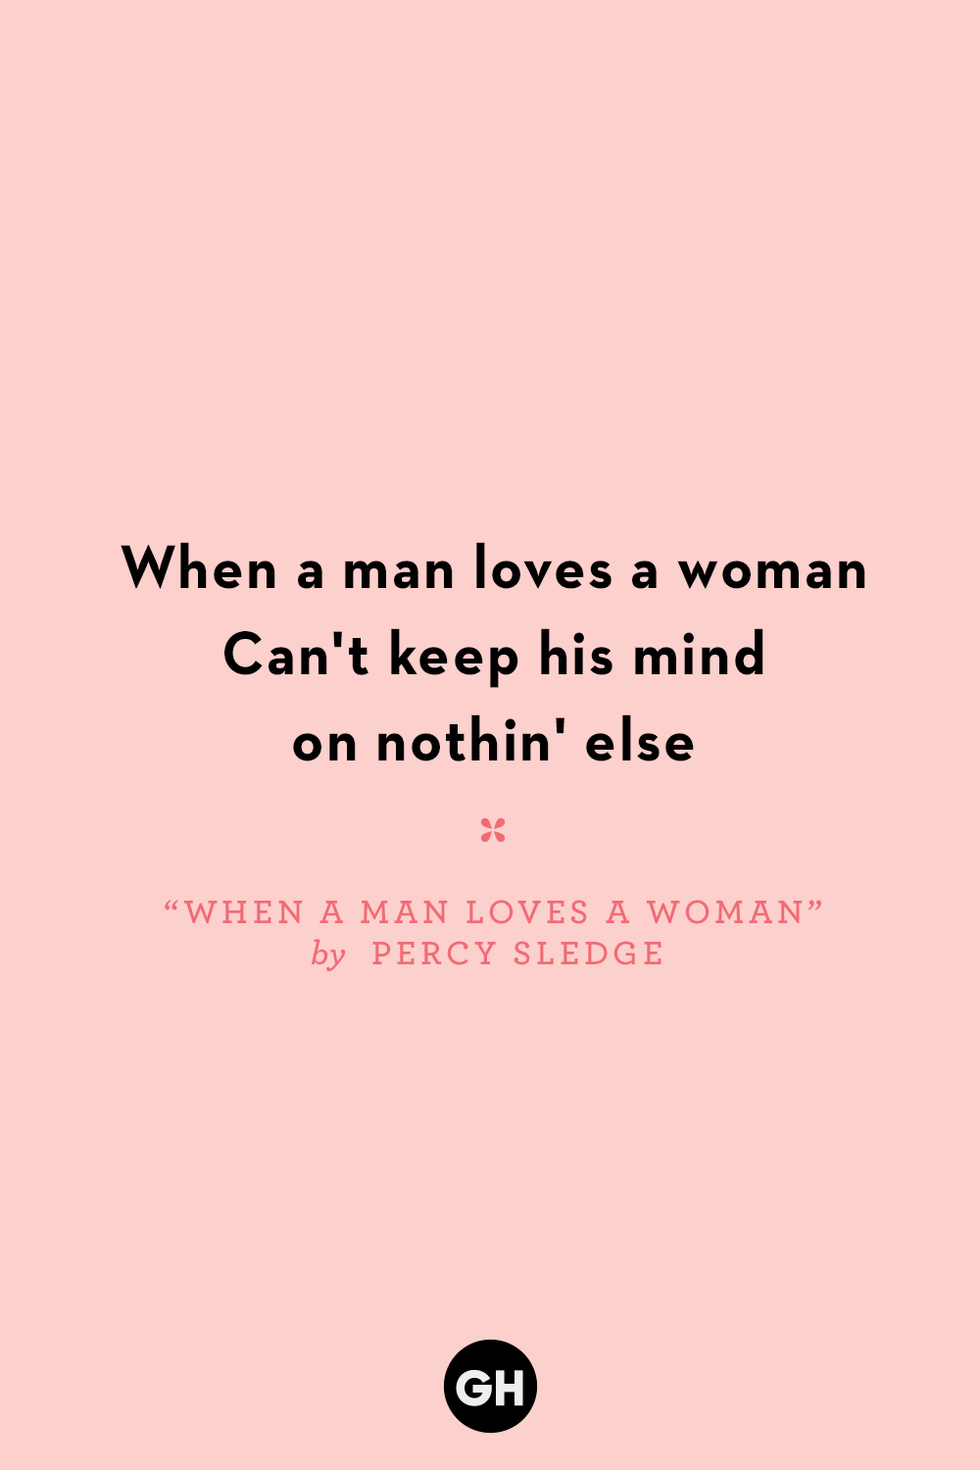 "when a man loves a woman" by percy sledge